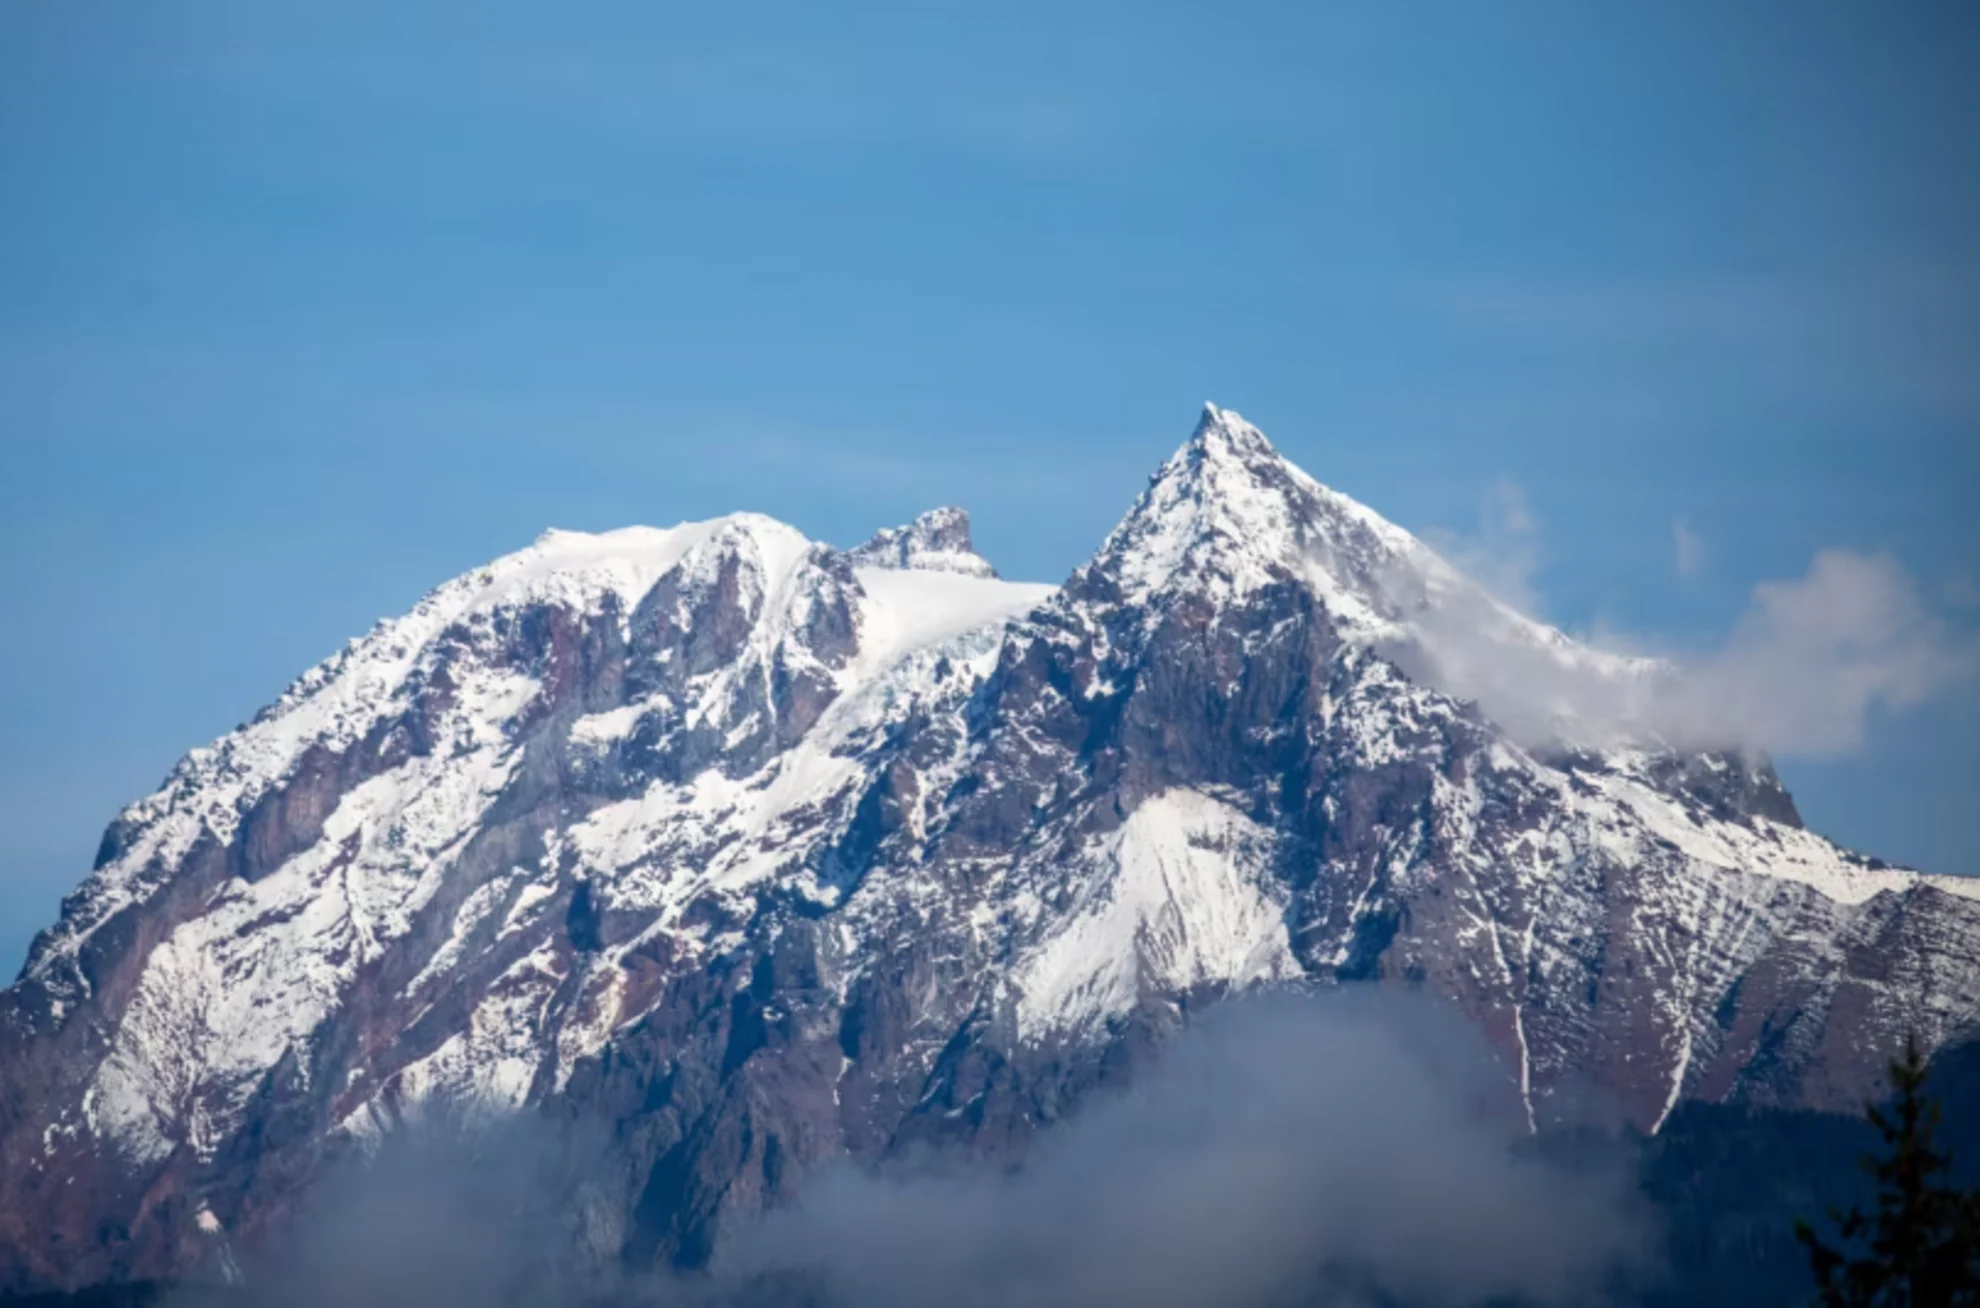 B.C. crews hopeful of resuming search for 3 missing climbers. Latest developments, here